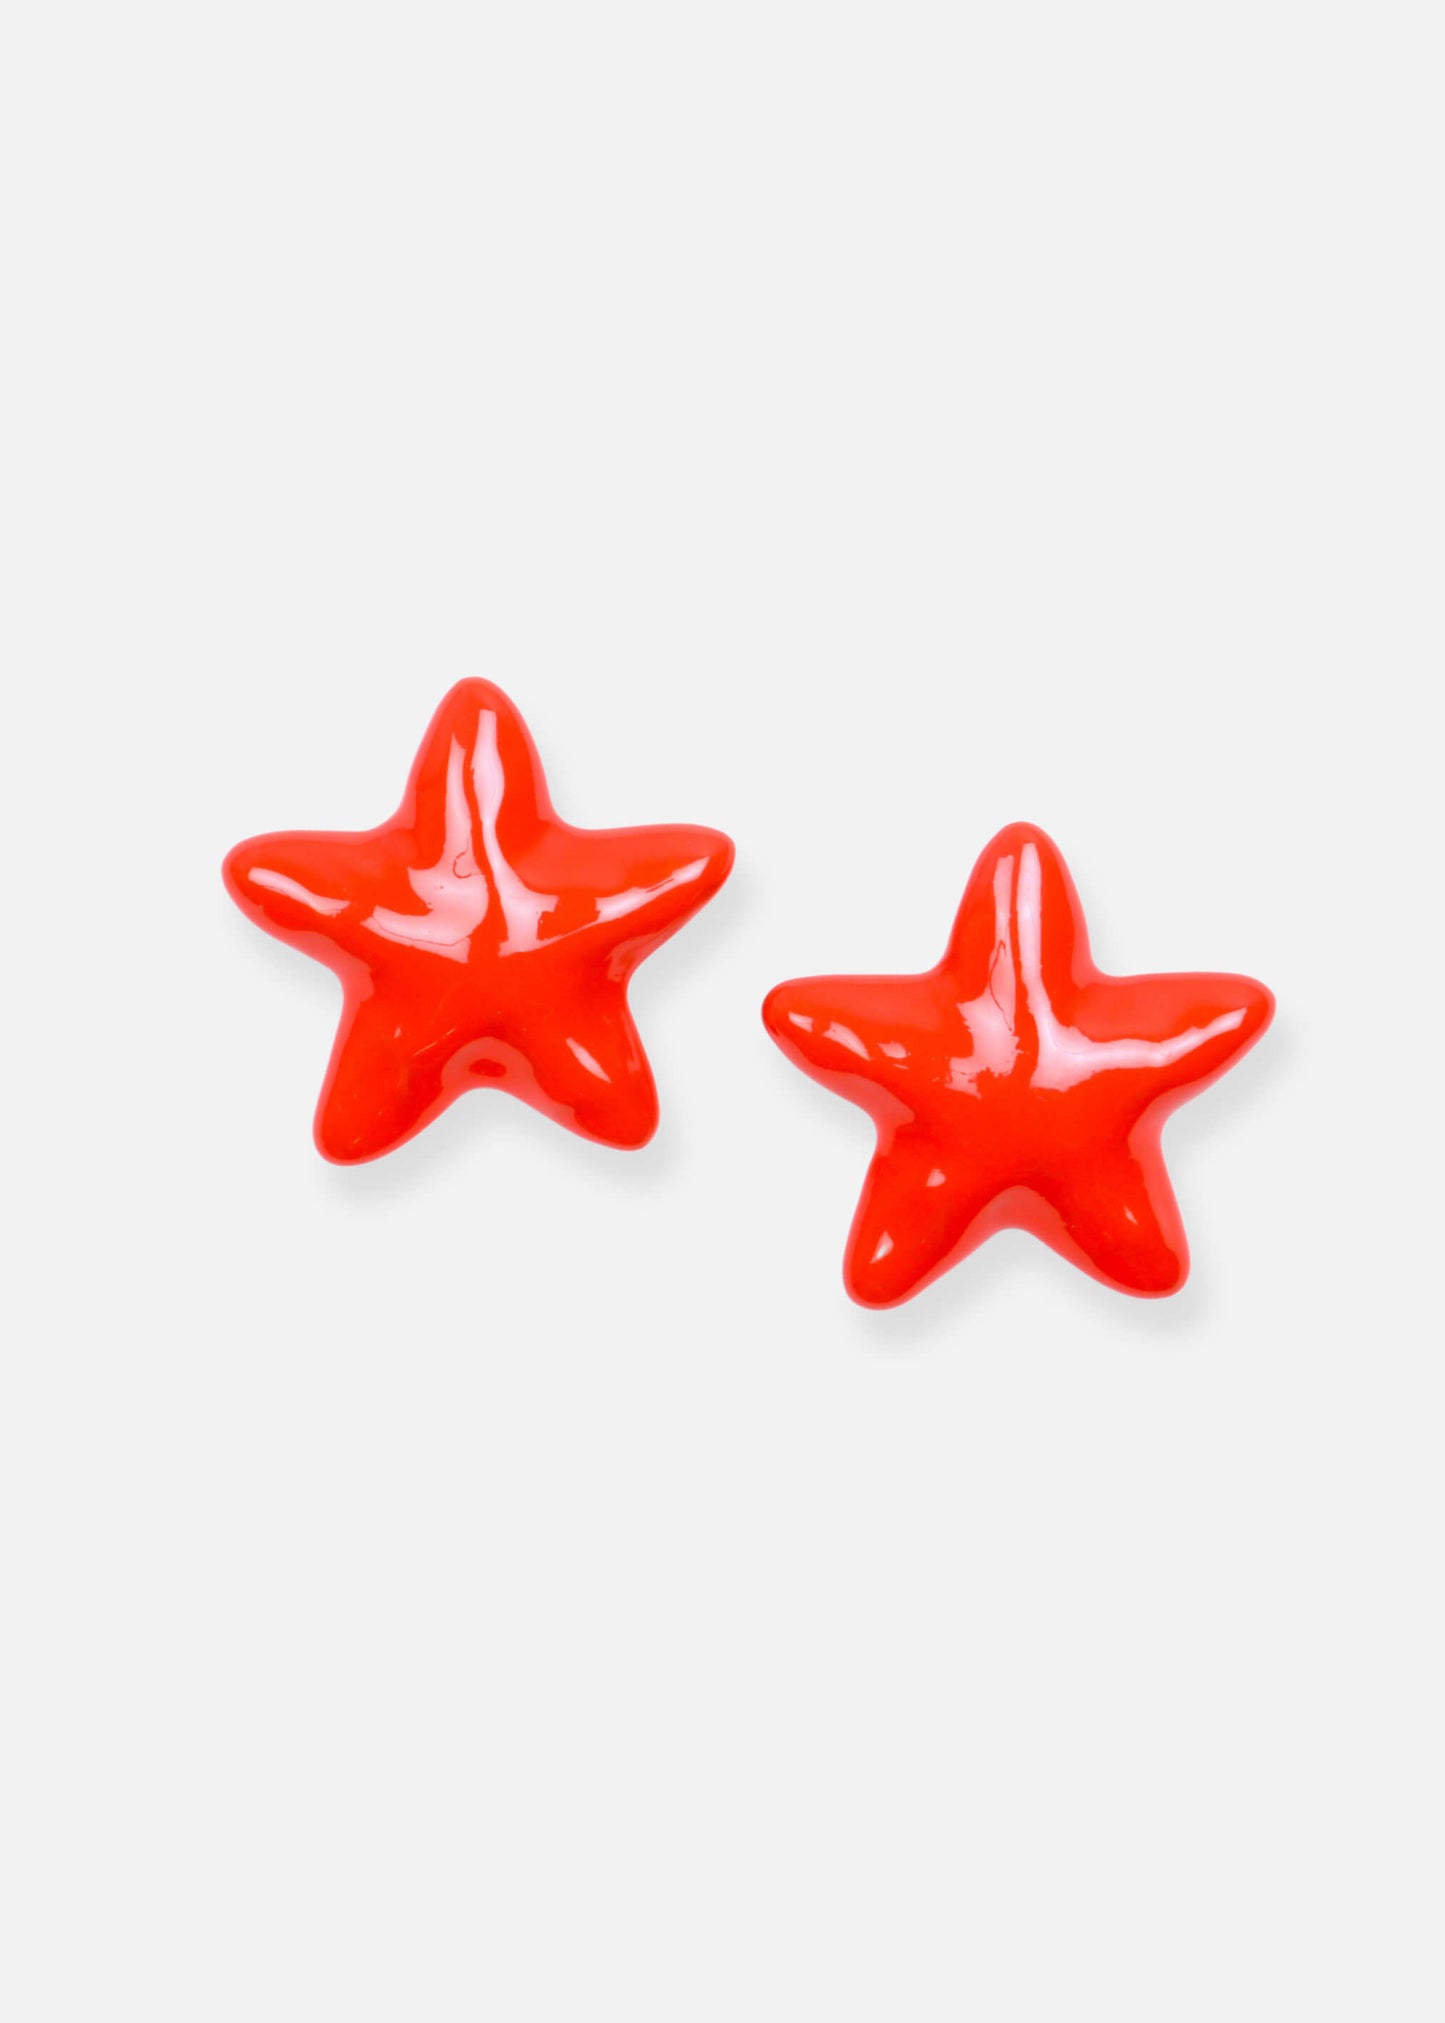 Vintage-inspired resin & enamel star earrings. Lightweight and chic. Handmade with love.